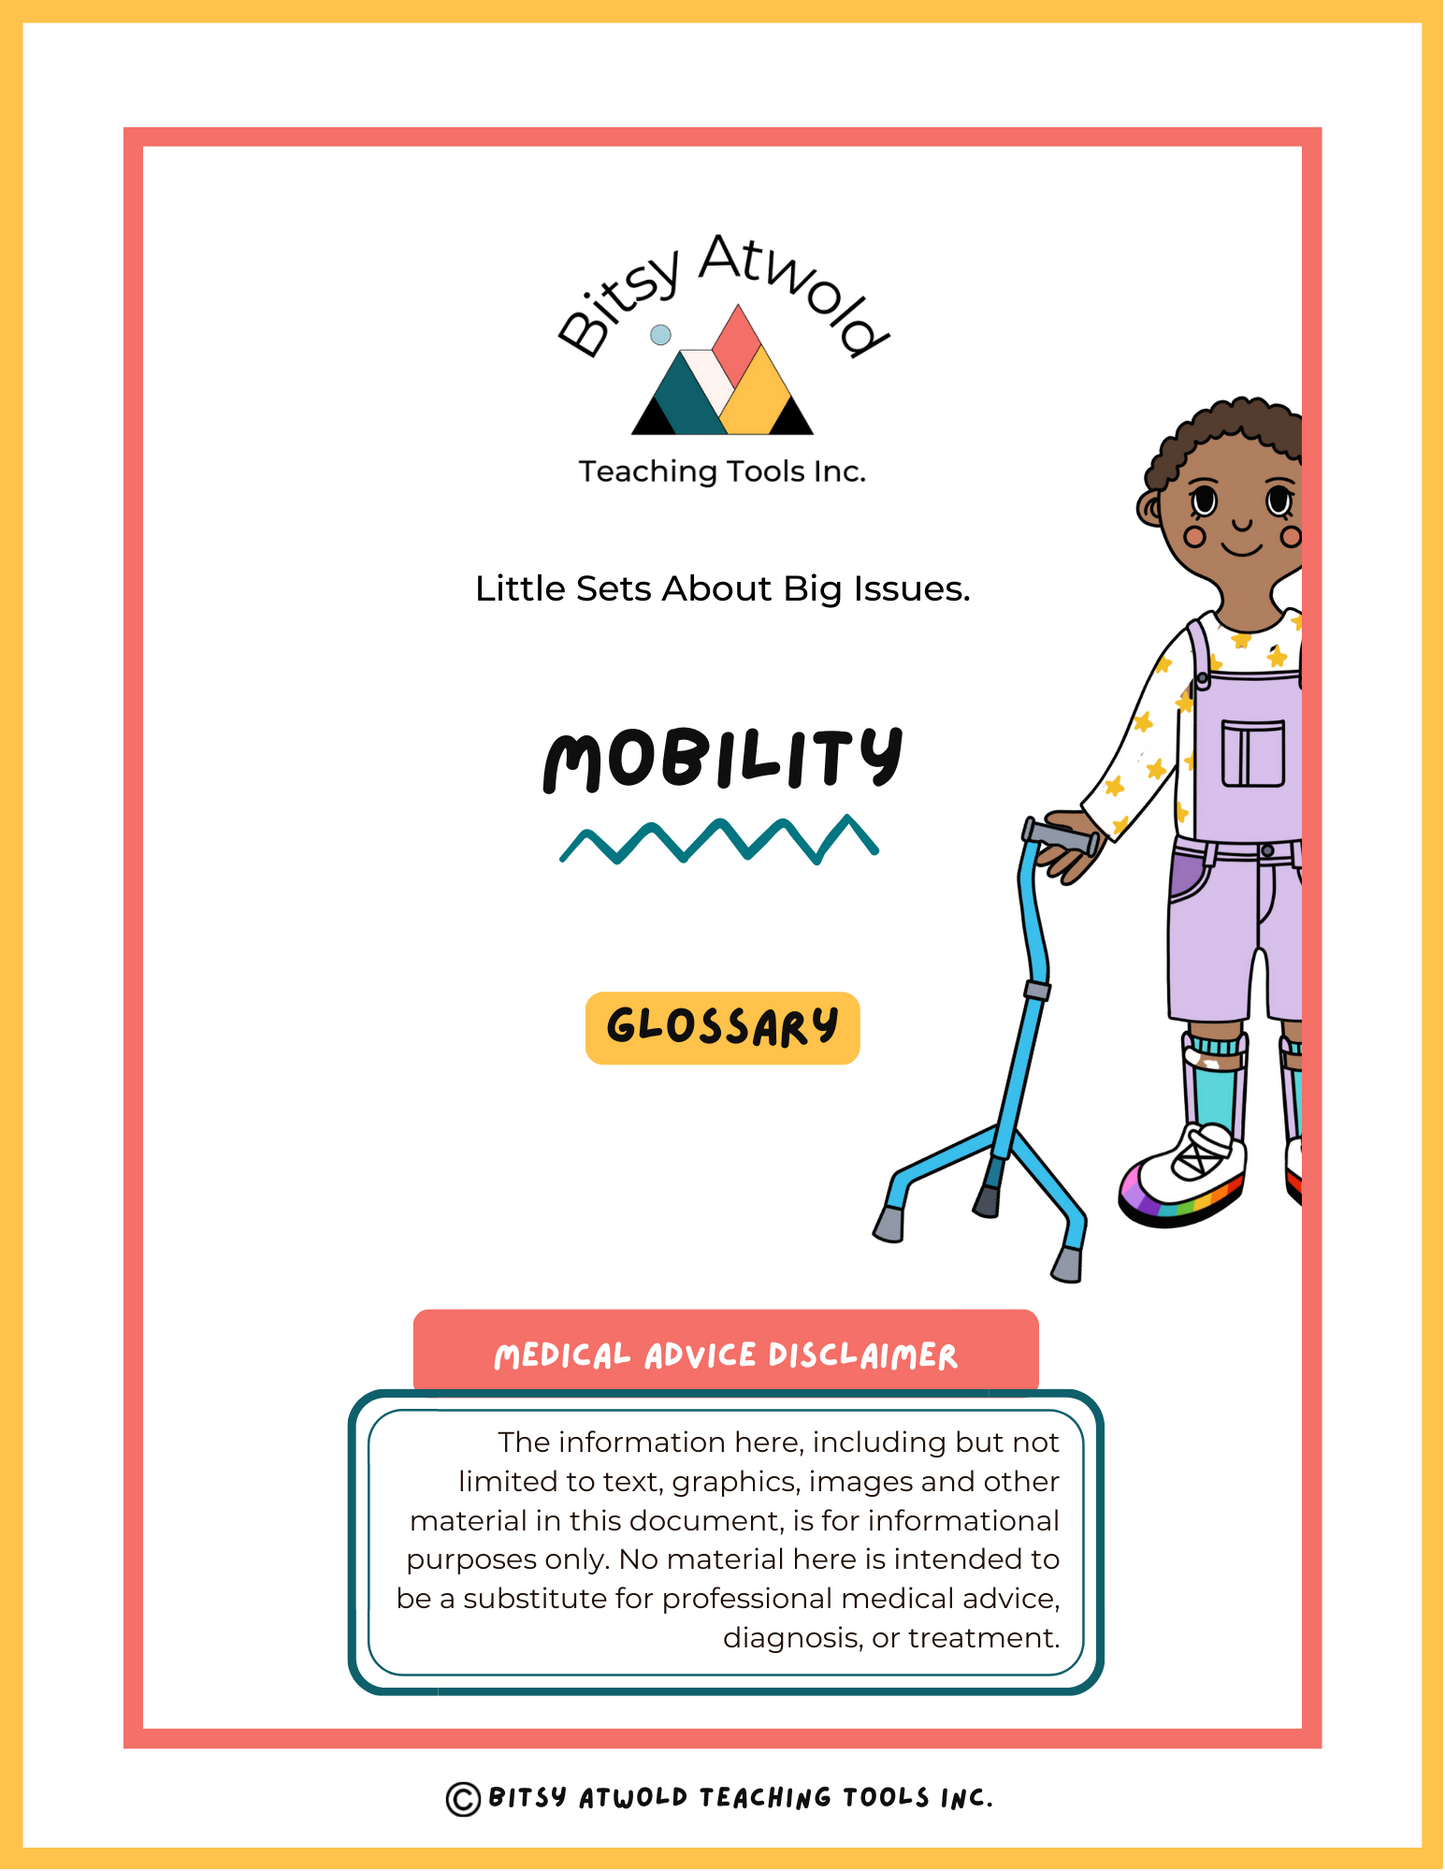 Mobility - Glossary